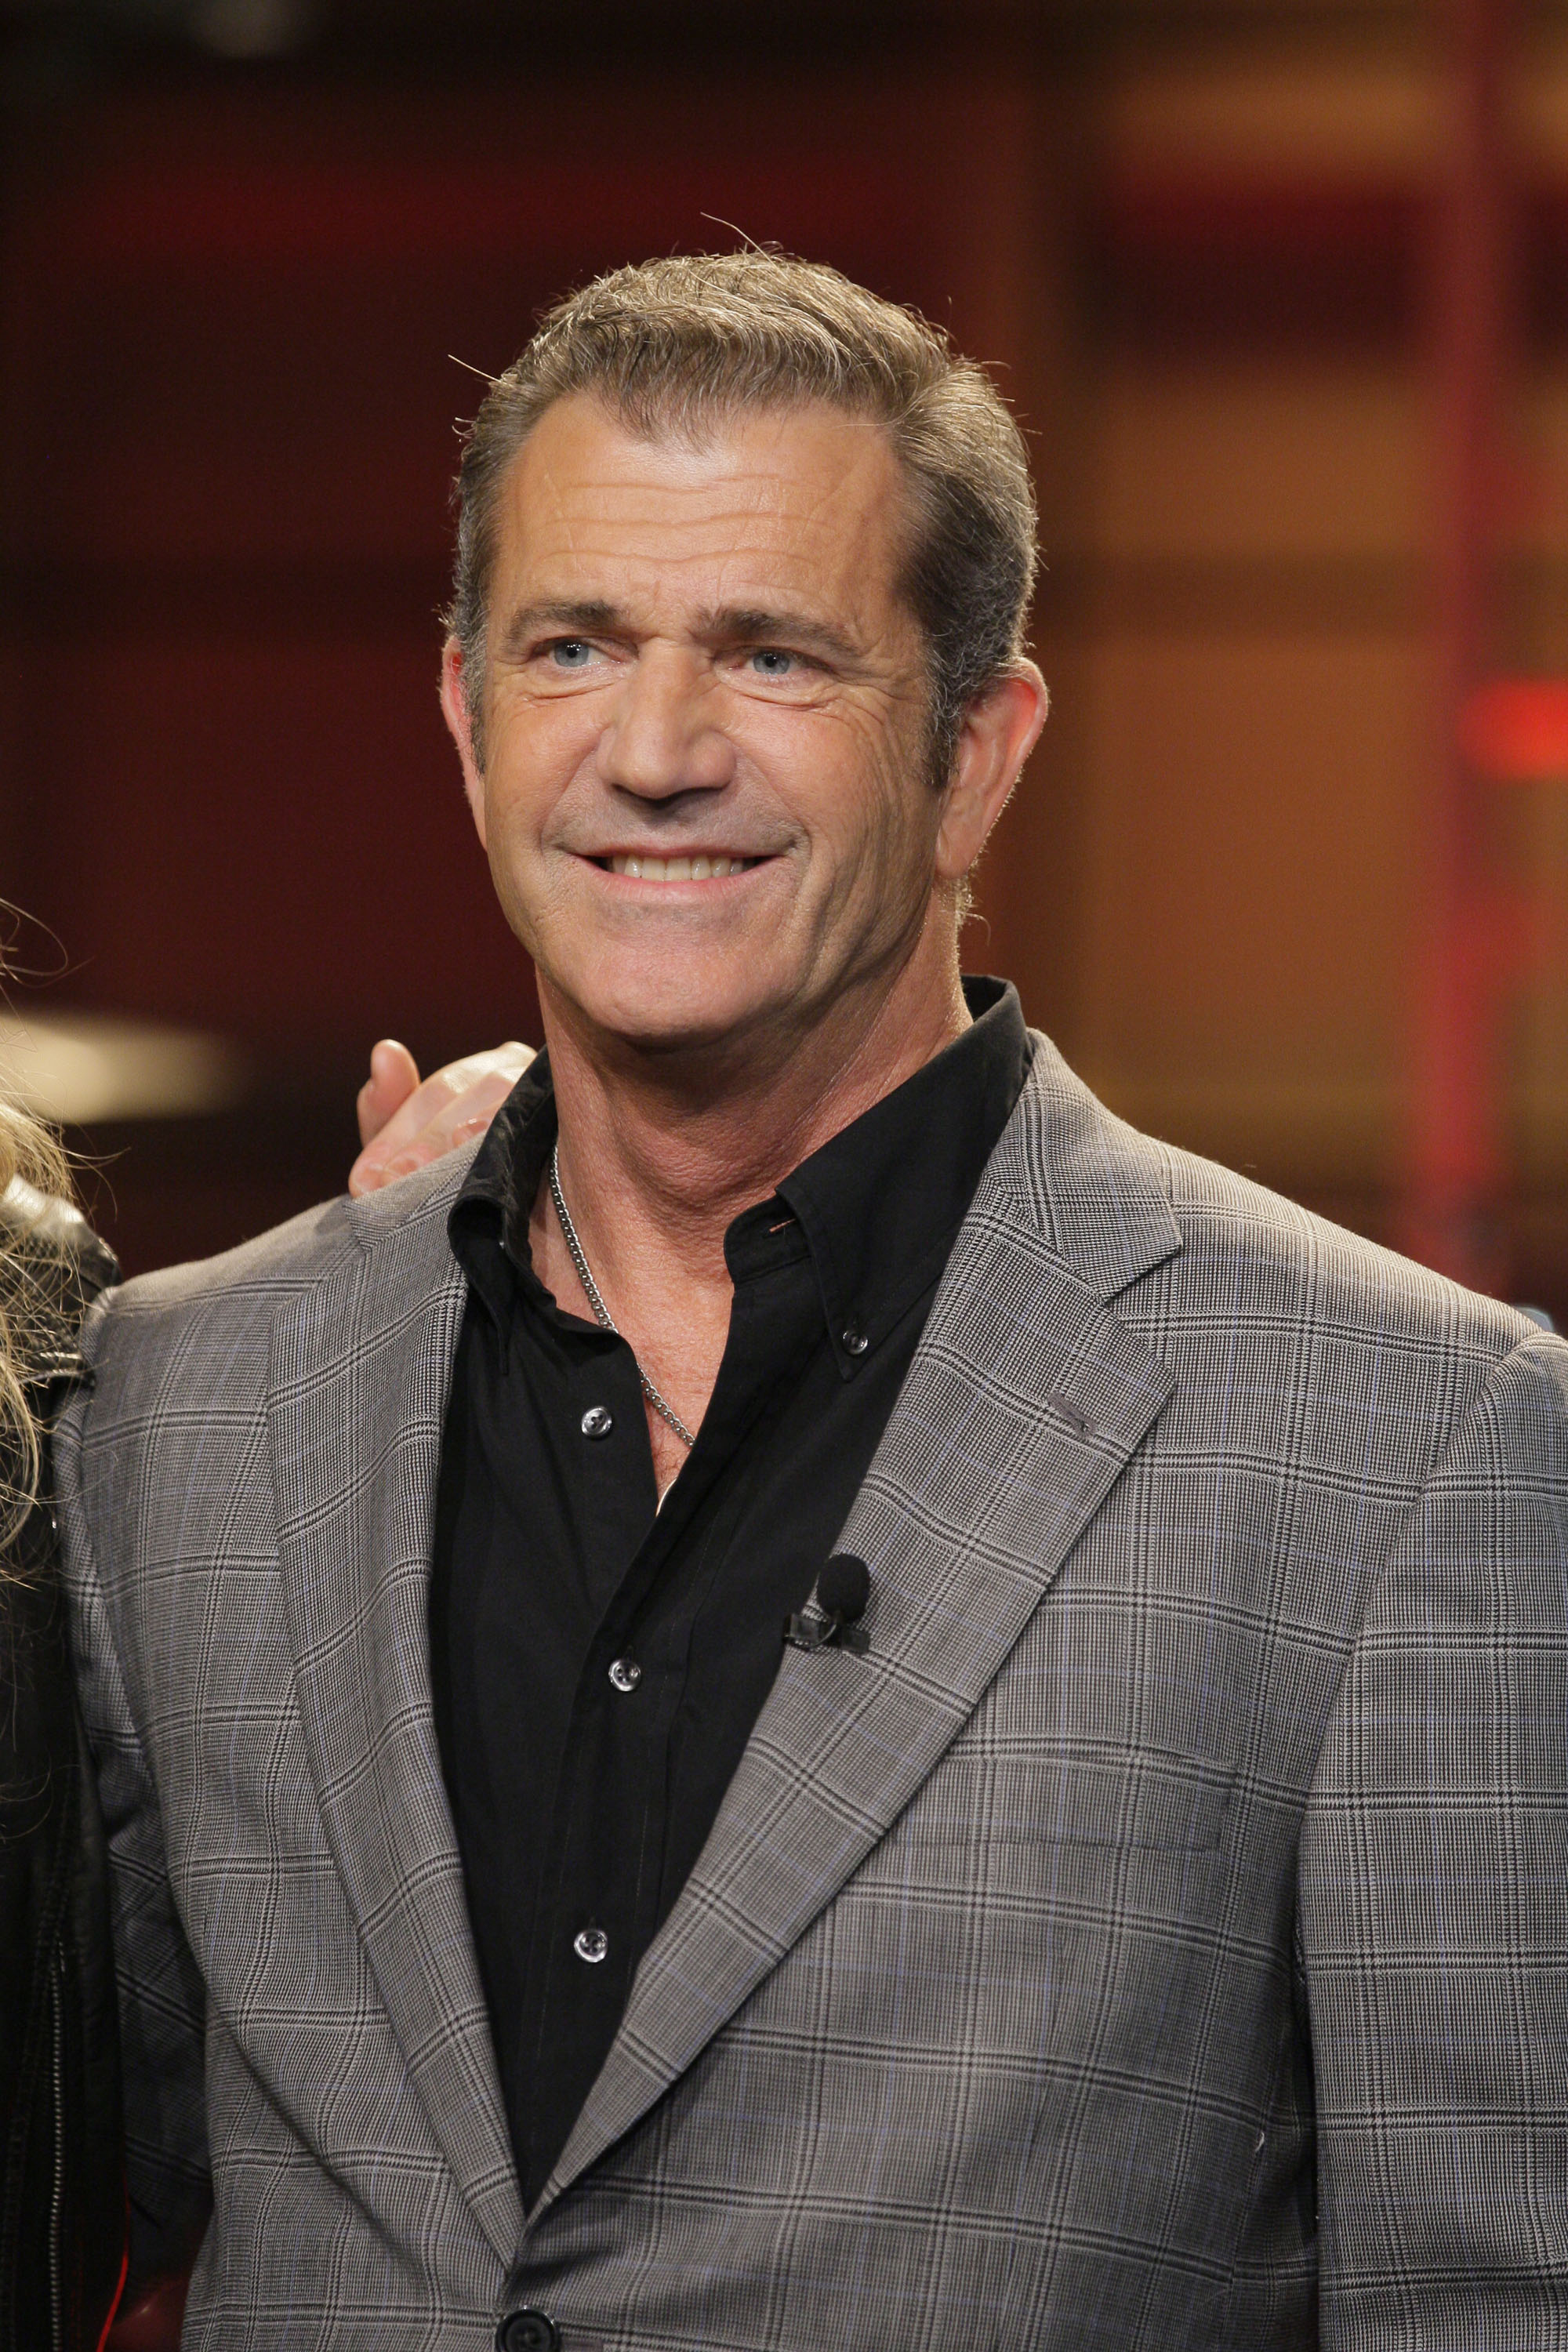 Mel Gibson in der "The Tonight Show with Jay Leno" am 27. April 2012 | Quelle: Getty Images